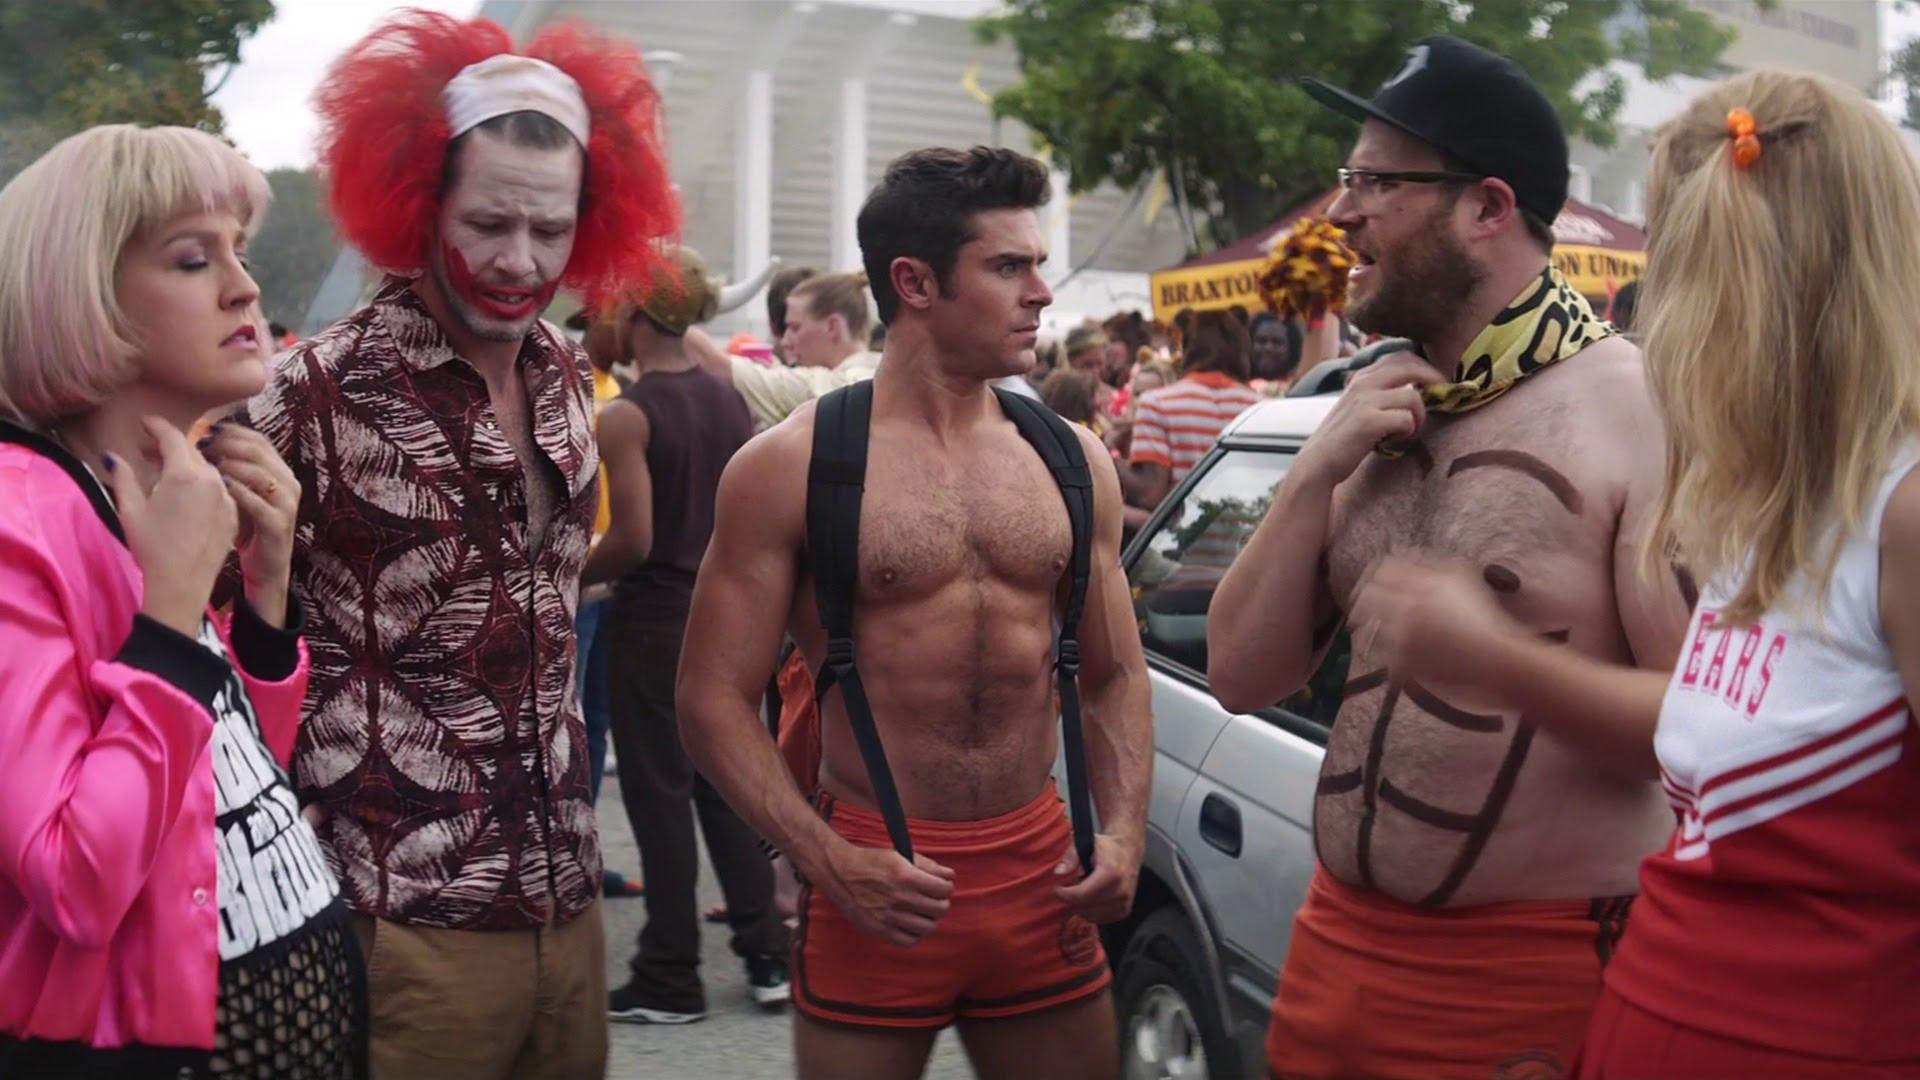 The Clipper  Seth Rogen Delivers His Special Breed of Comedy in “Neighbors  2: Sorority Rising”